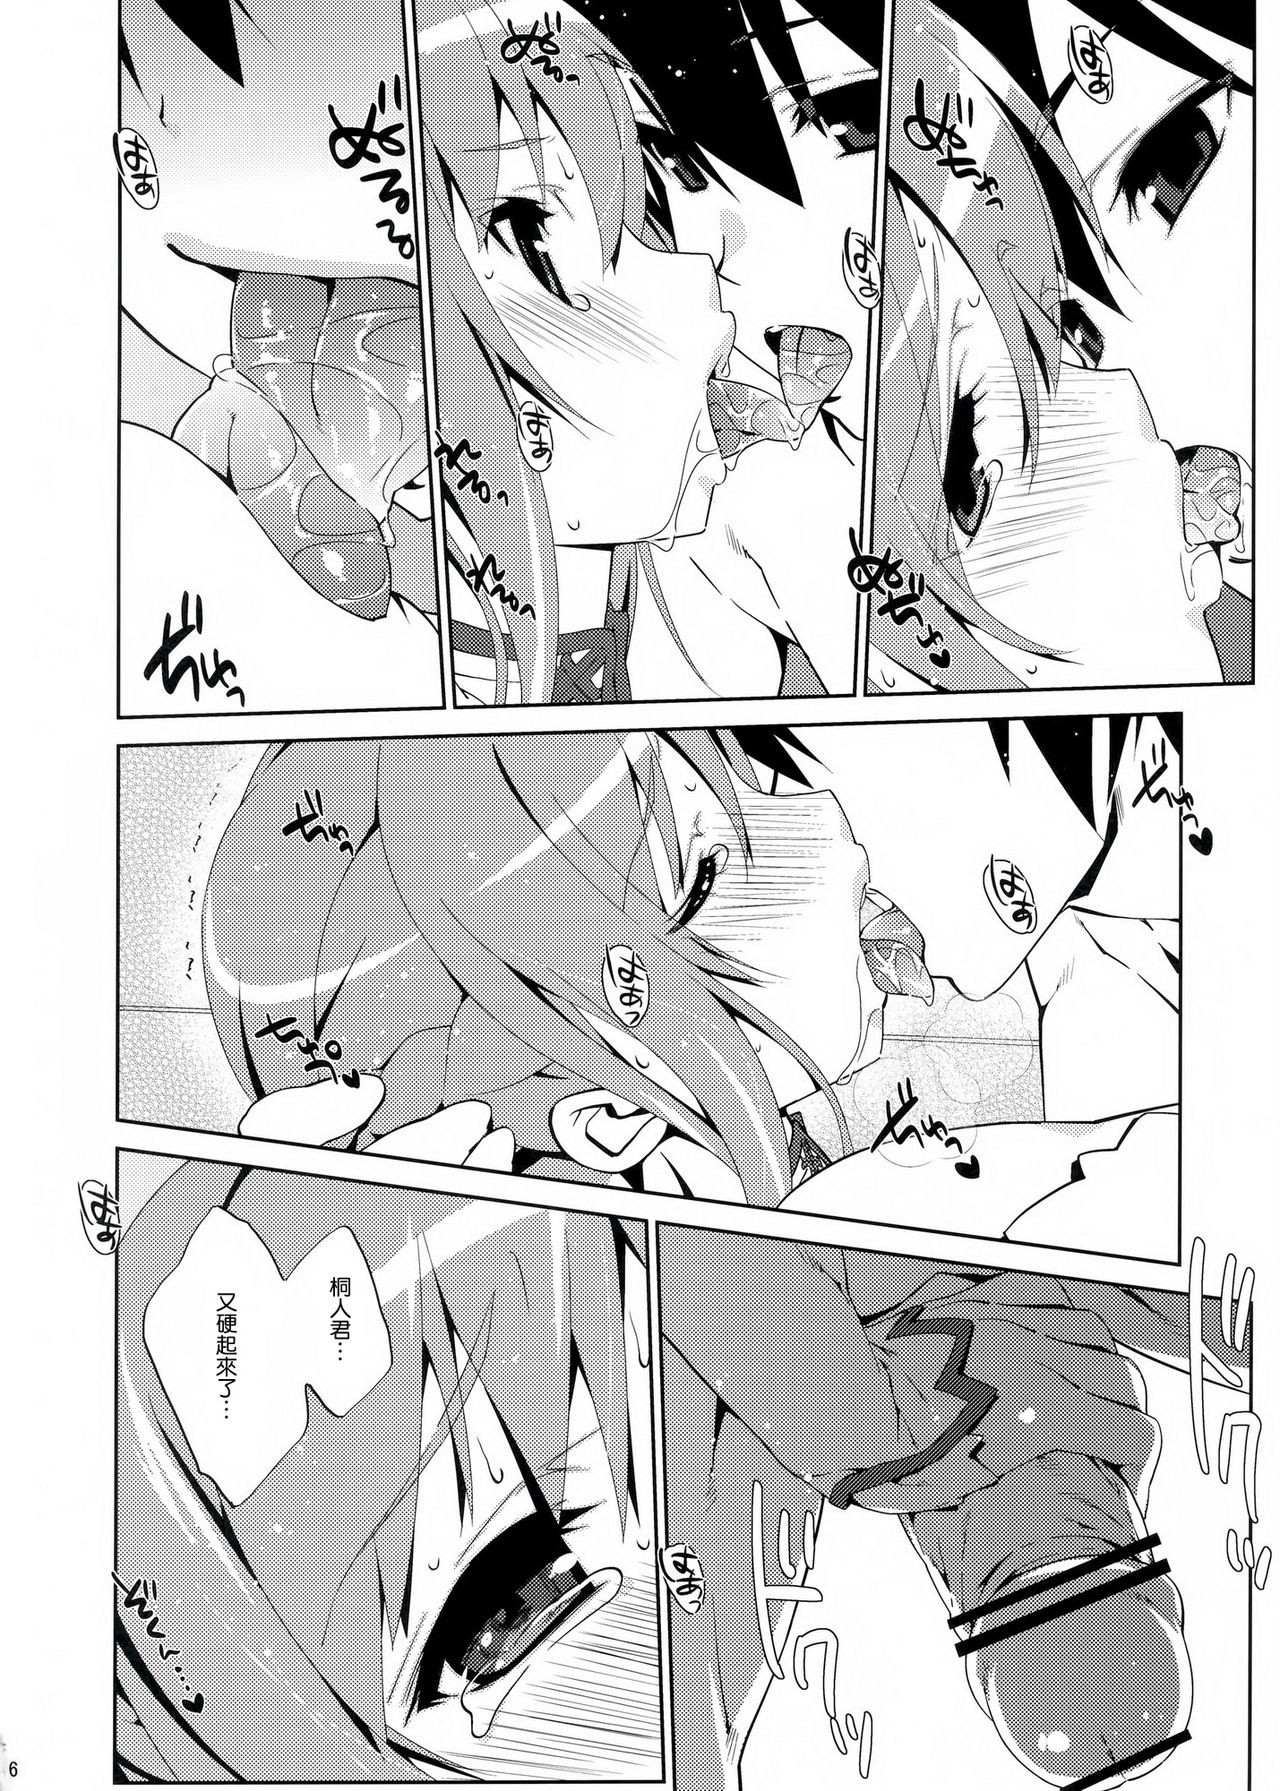 SPECIAL ASUNA ONLINE 2 hentai manga picture 2